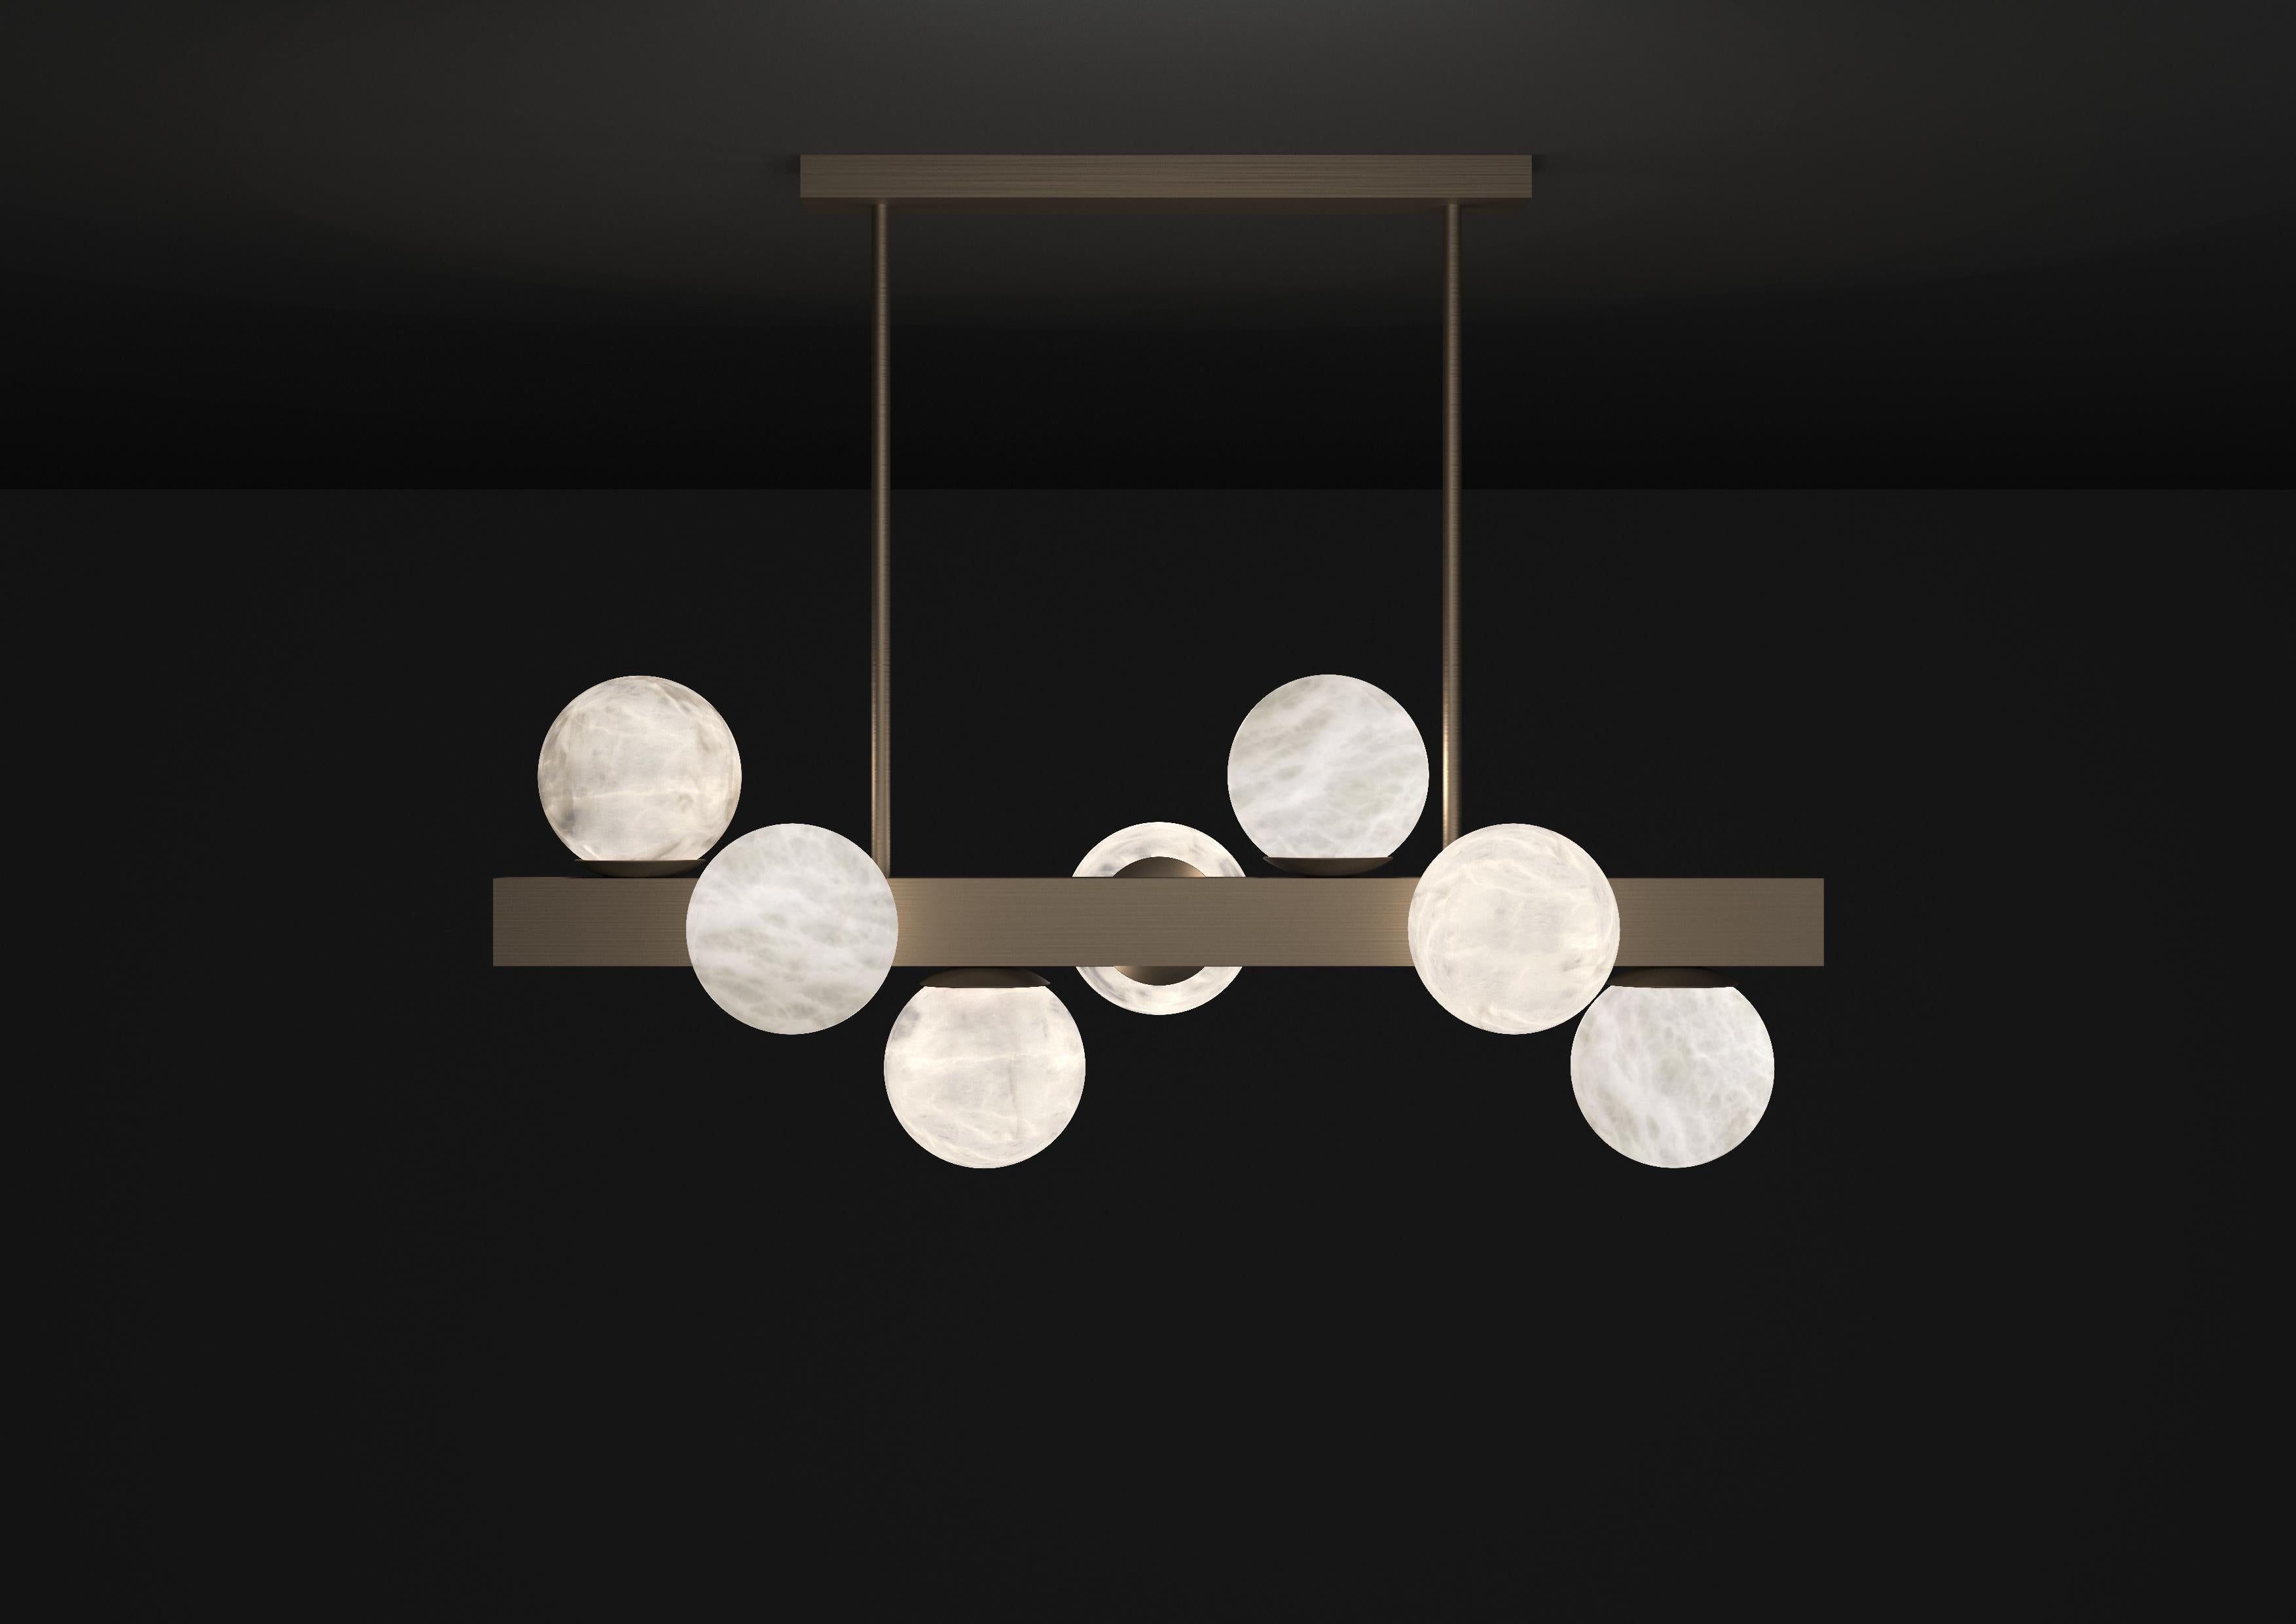 Dioniso Brushed Burnished Metal Pendant Lamp by Alabastro Italiano
Dimensions: D 35 x W 91 x H 36 cm.
Materials: White alabaster and metal.

Available in different finishes: Shiny Silver, Bronze, Brushed Brass, Ruggine of Florence, Brushed